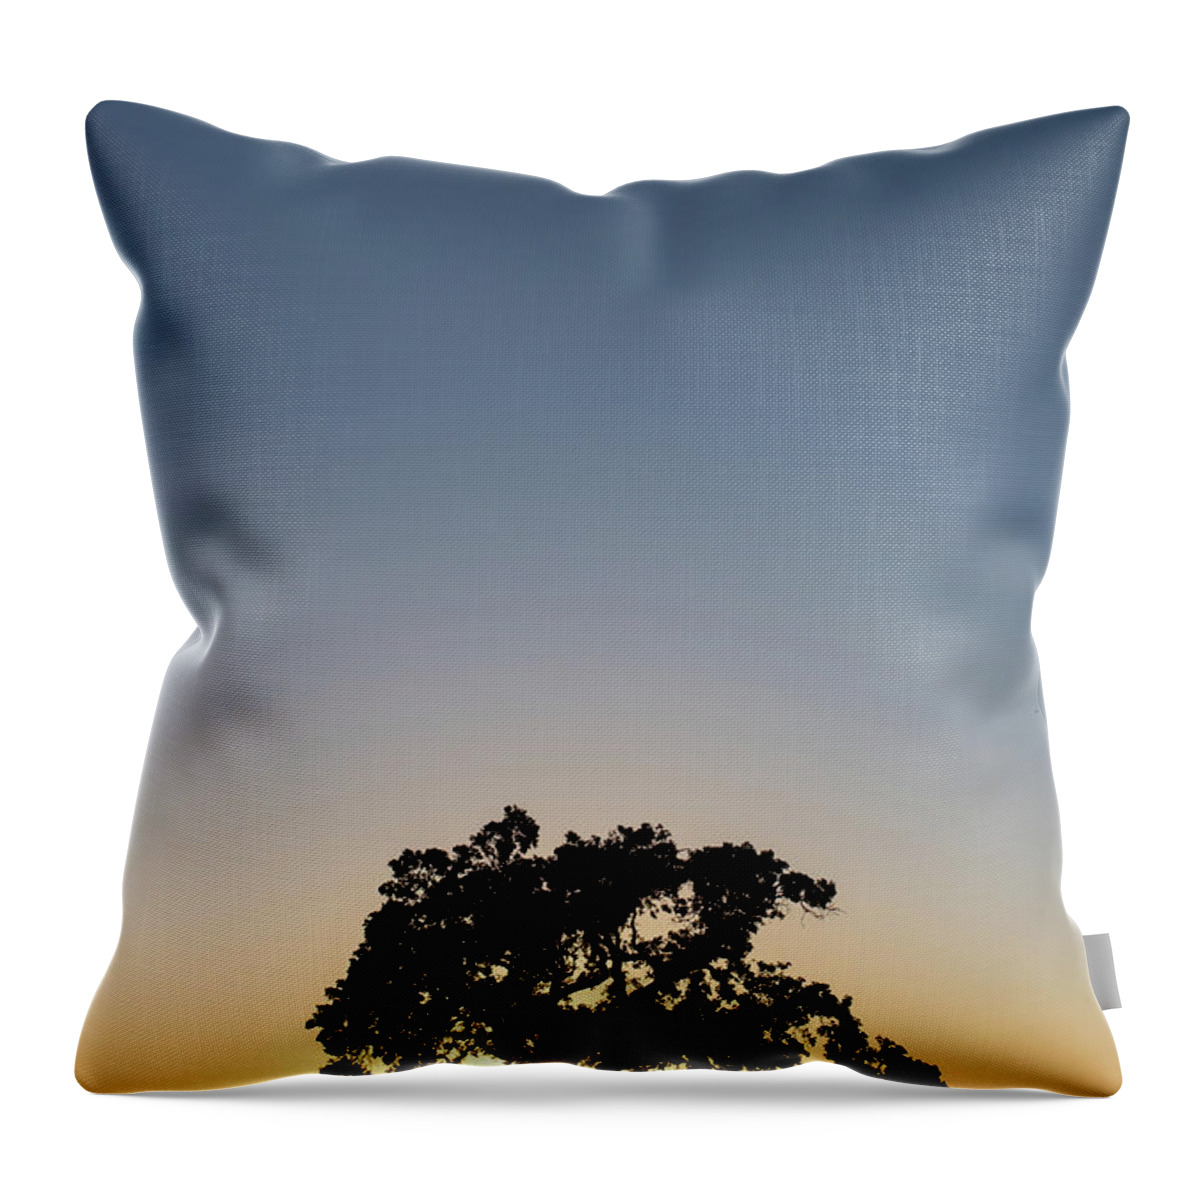 Napa Valley Oak Throw Pillow featuring the photograph Napa Valley Oak by Aileen Savage